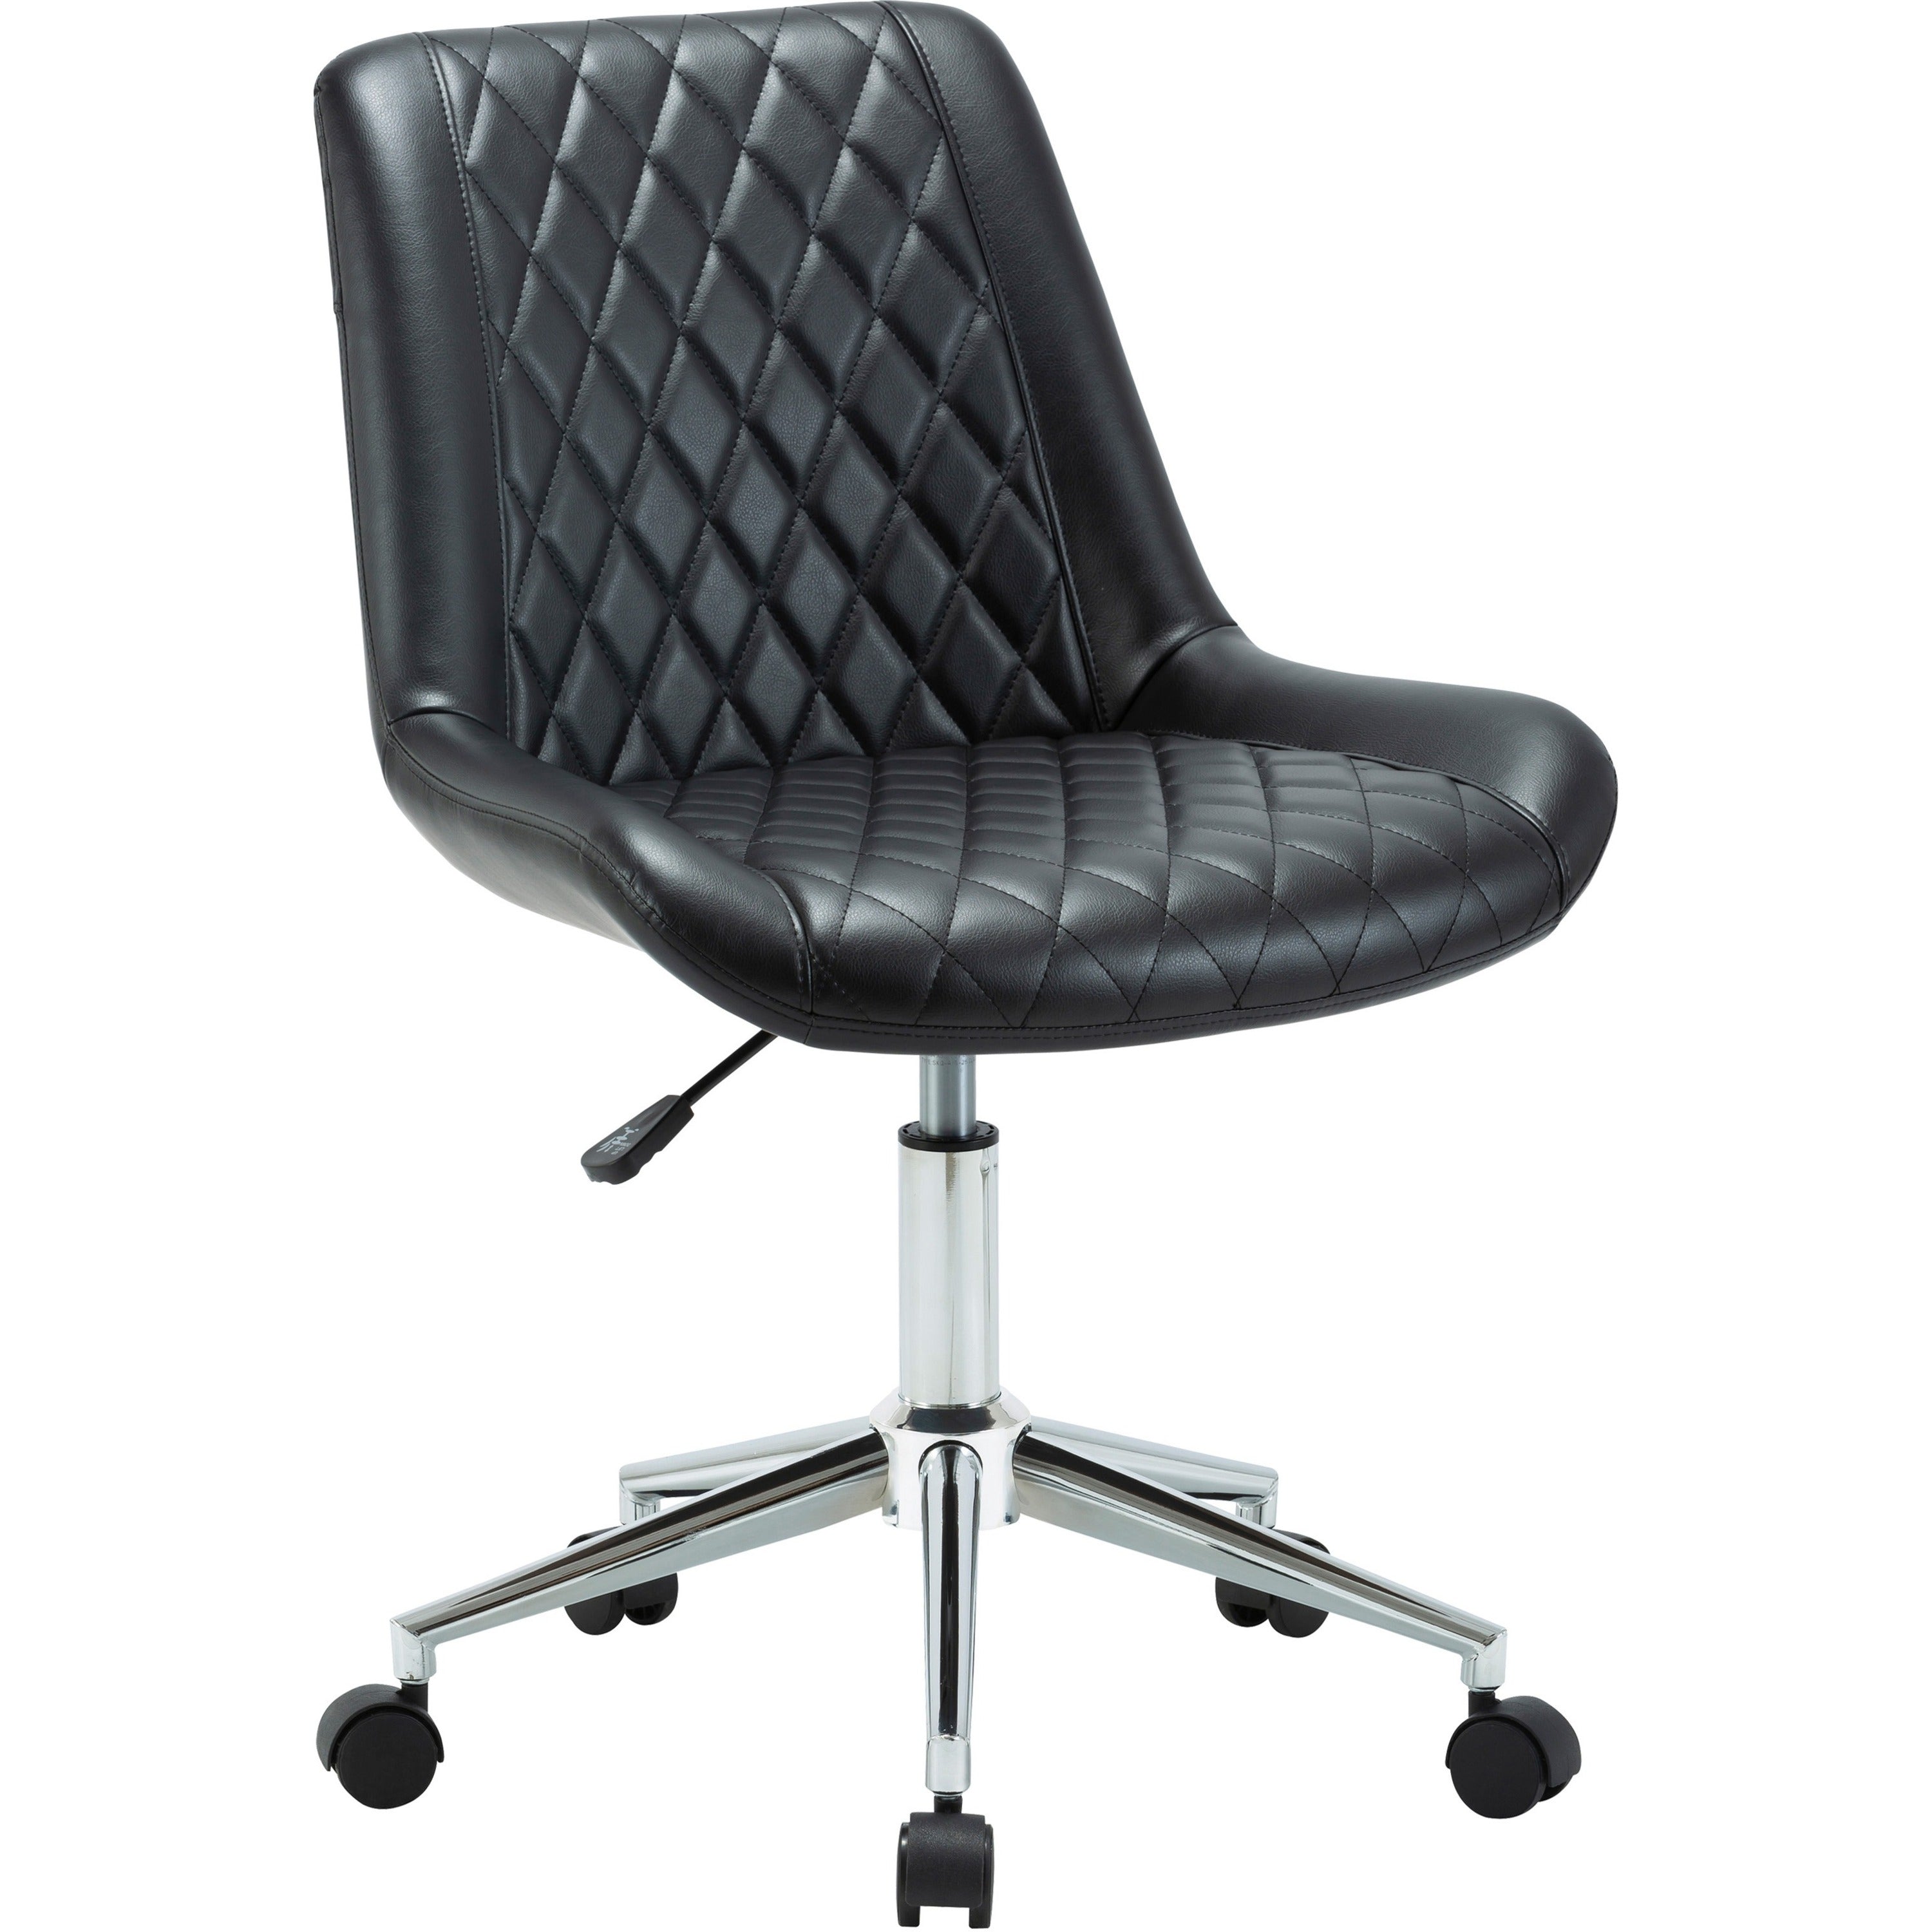 lys-low-back-office-chair-black-plywood-bonded-leather-seat-black-plywood-vinyl-back-low-back-1-each_lysch304bnbk - 1